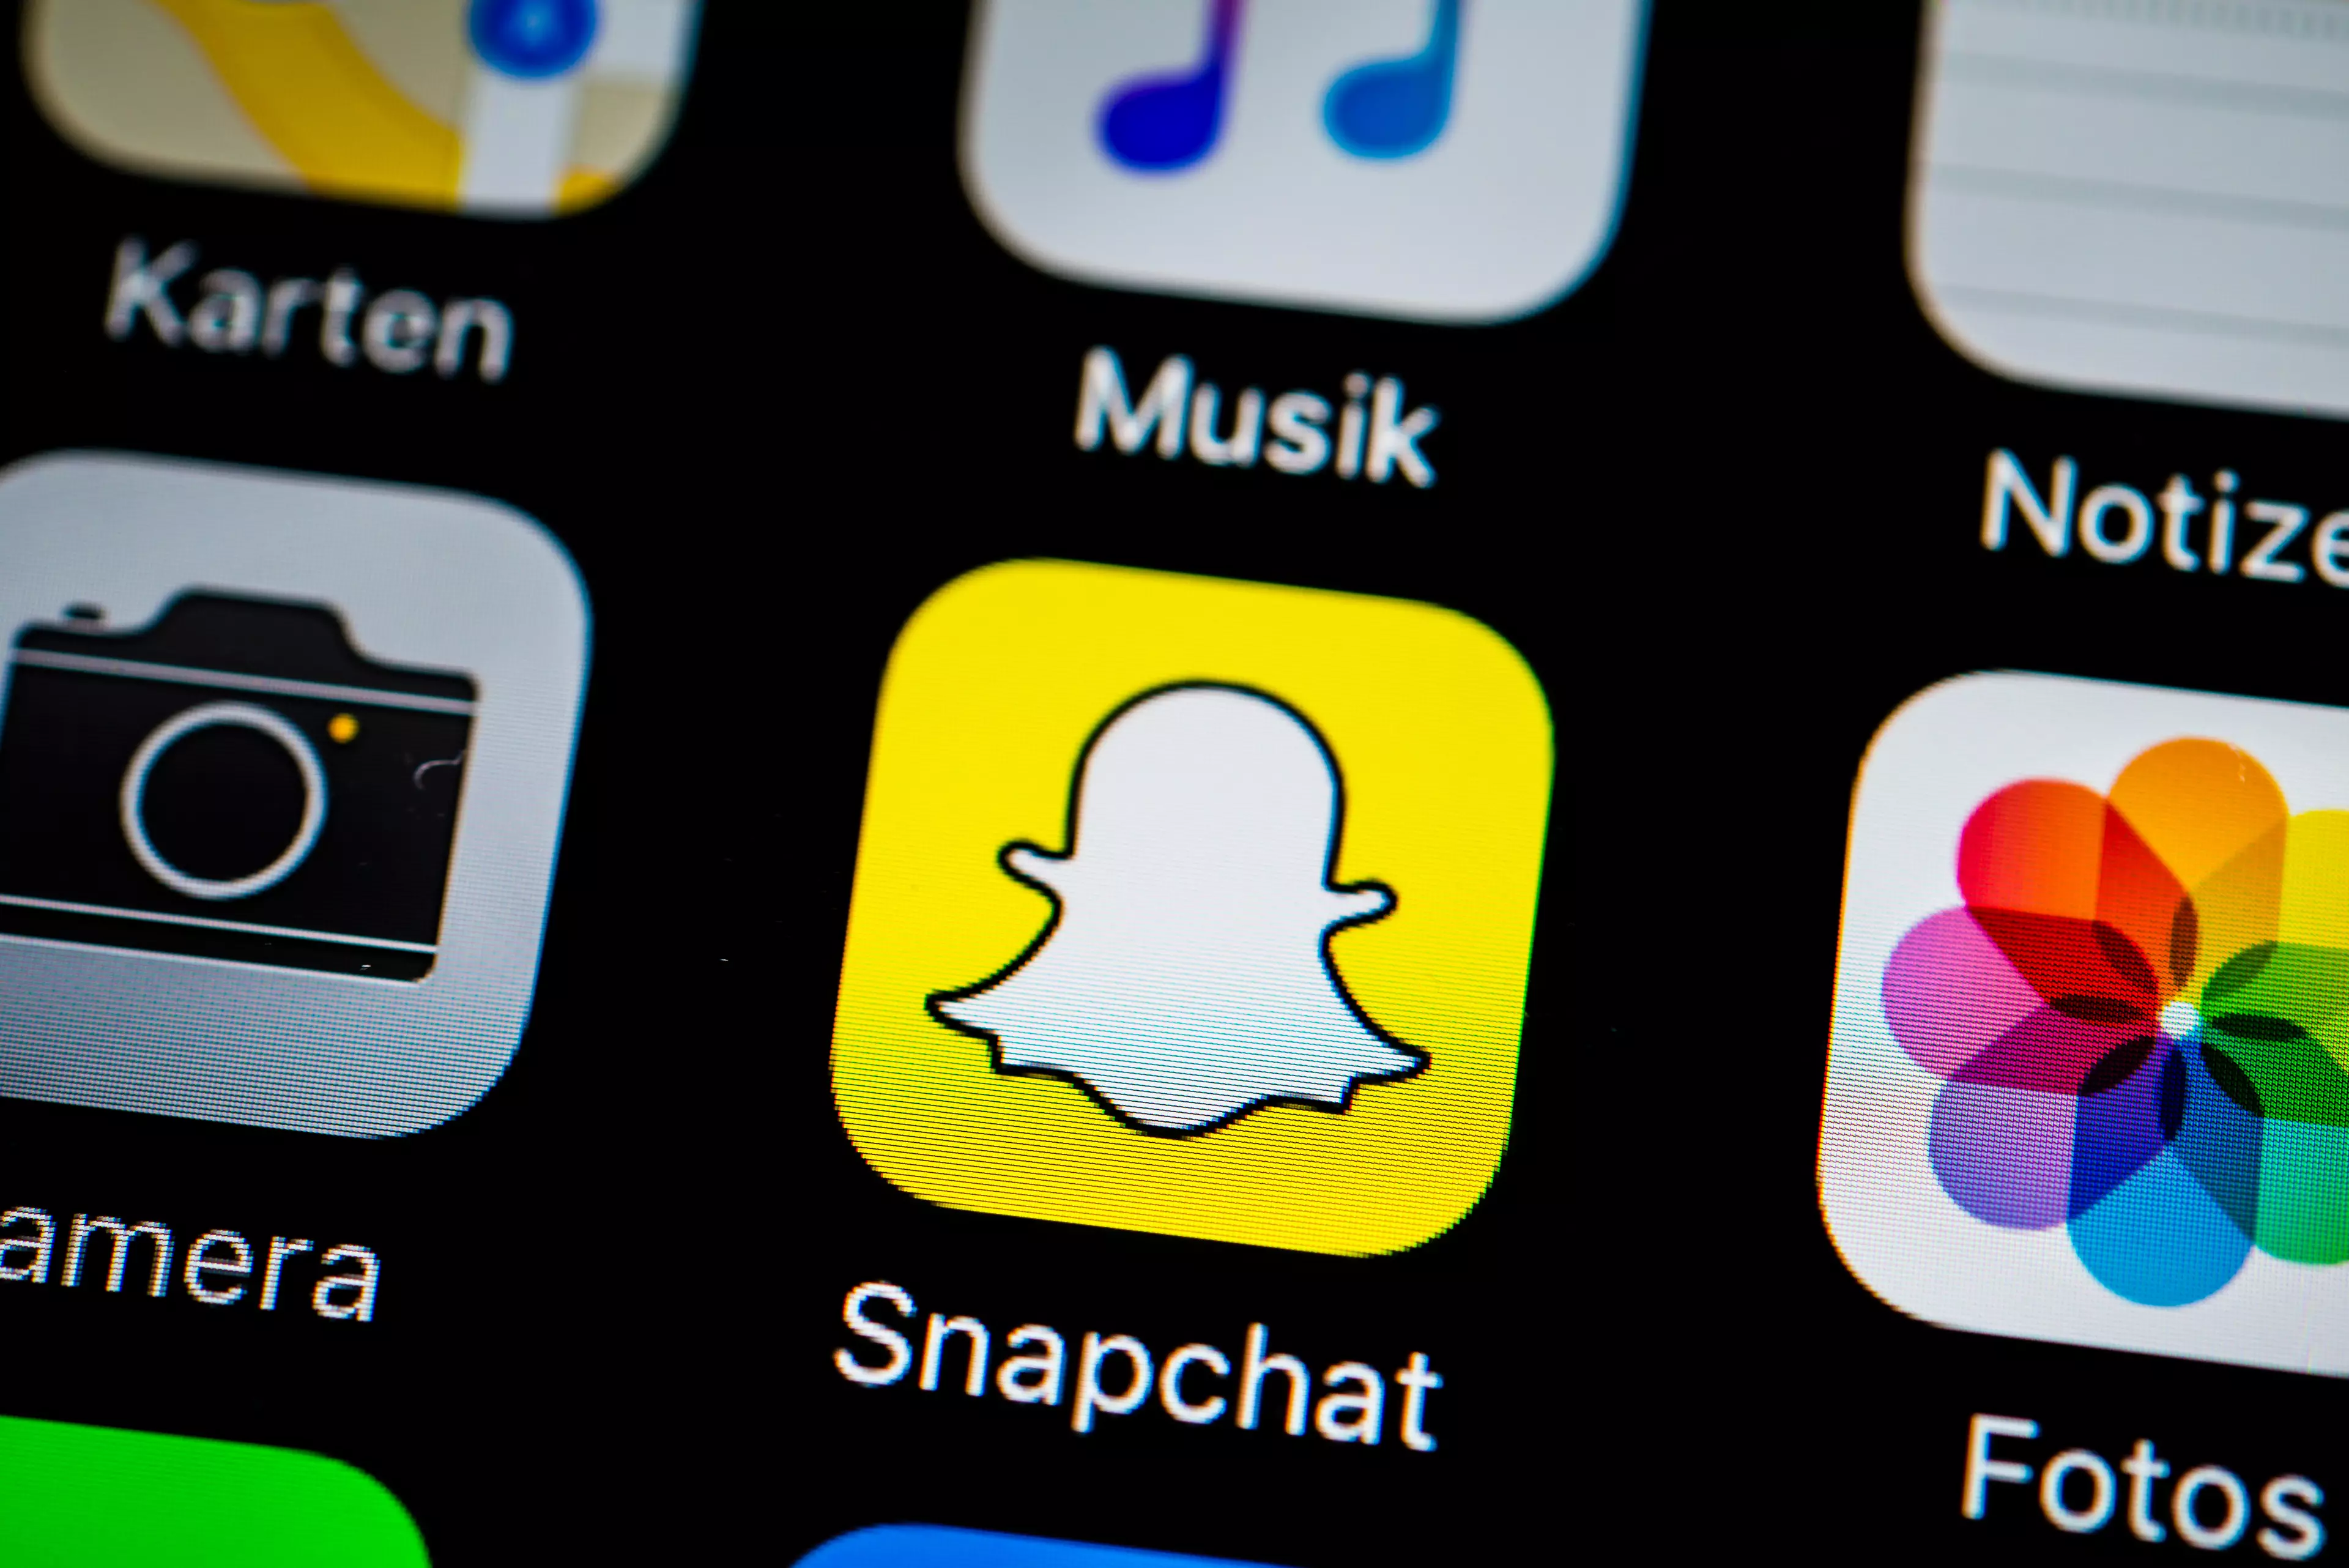 Snapchat is down for thousands of users.